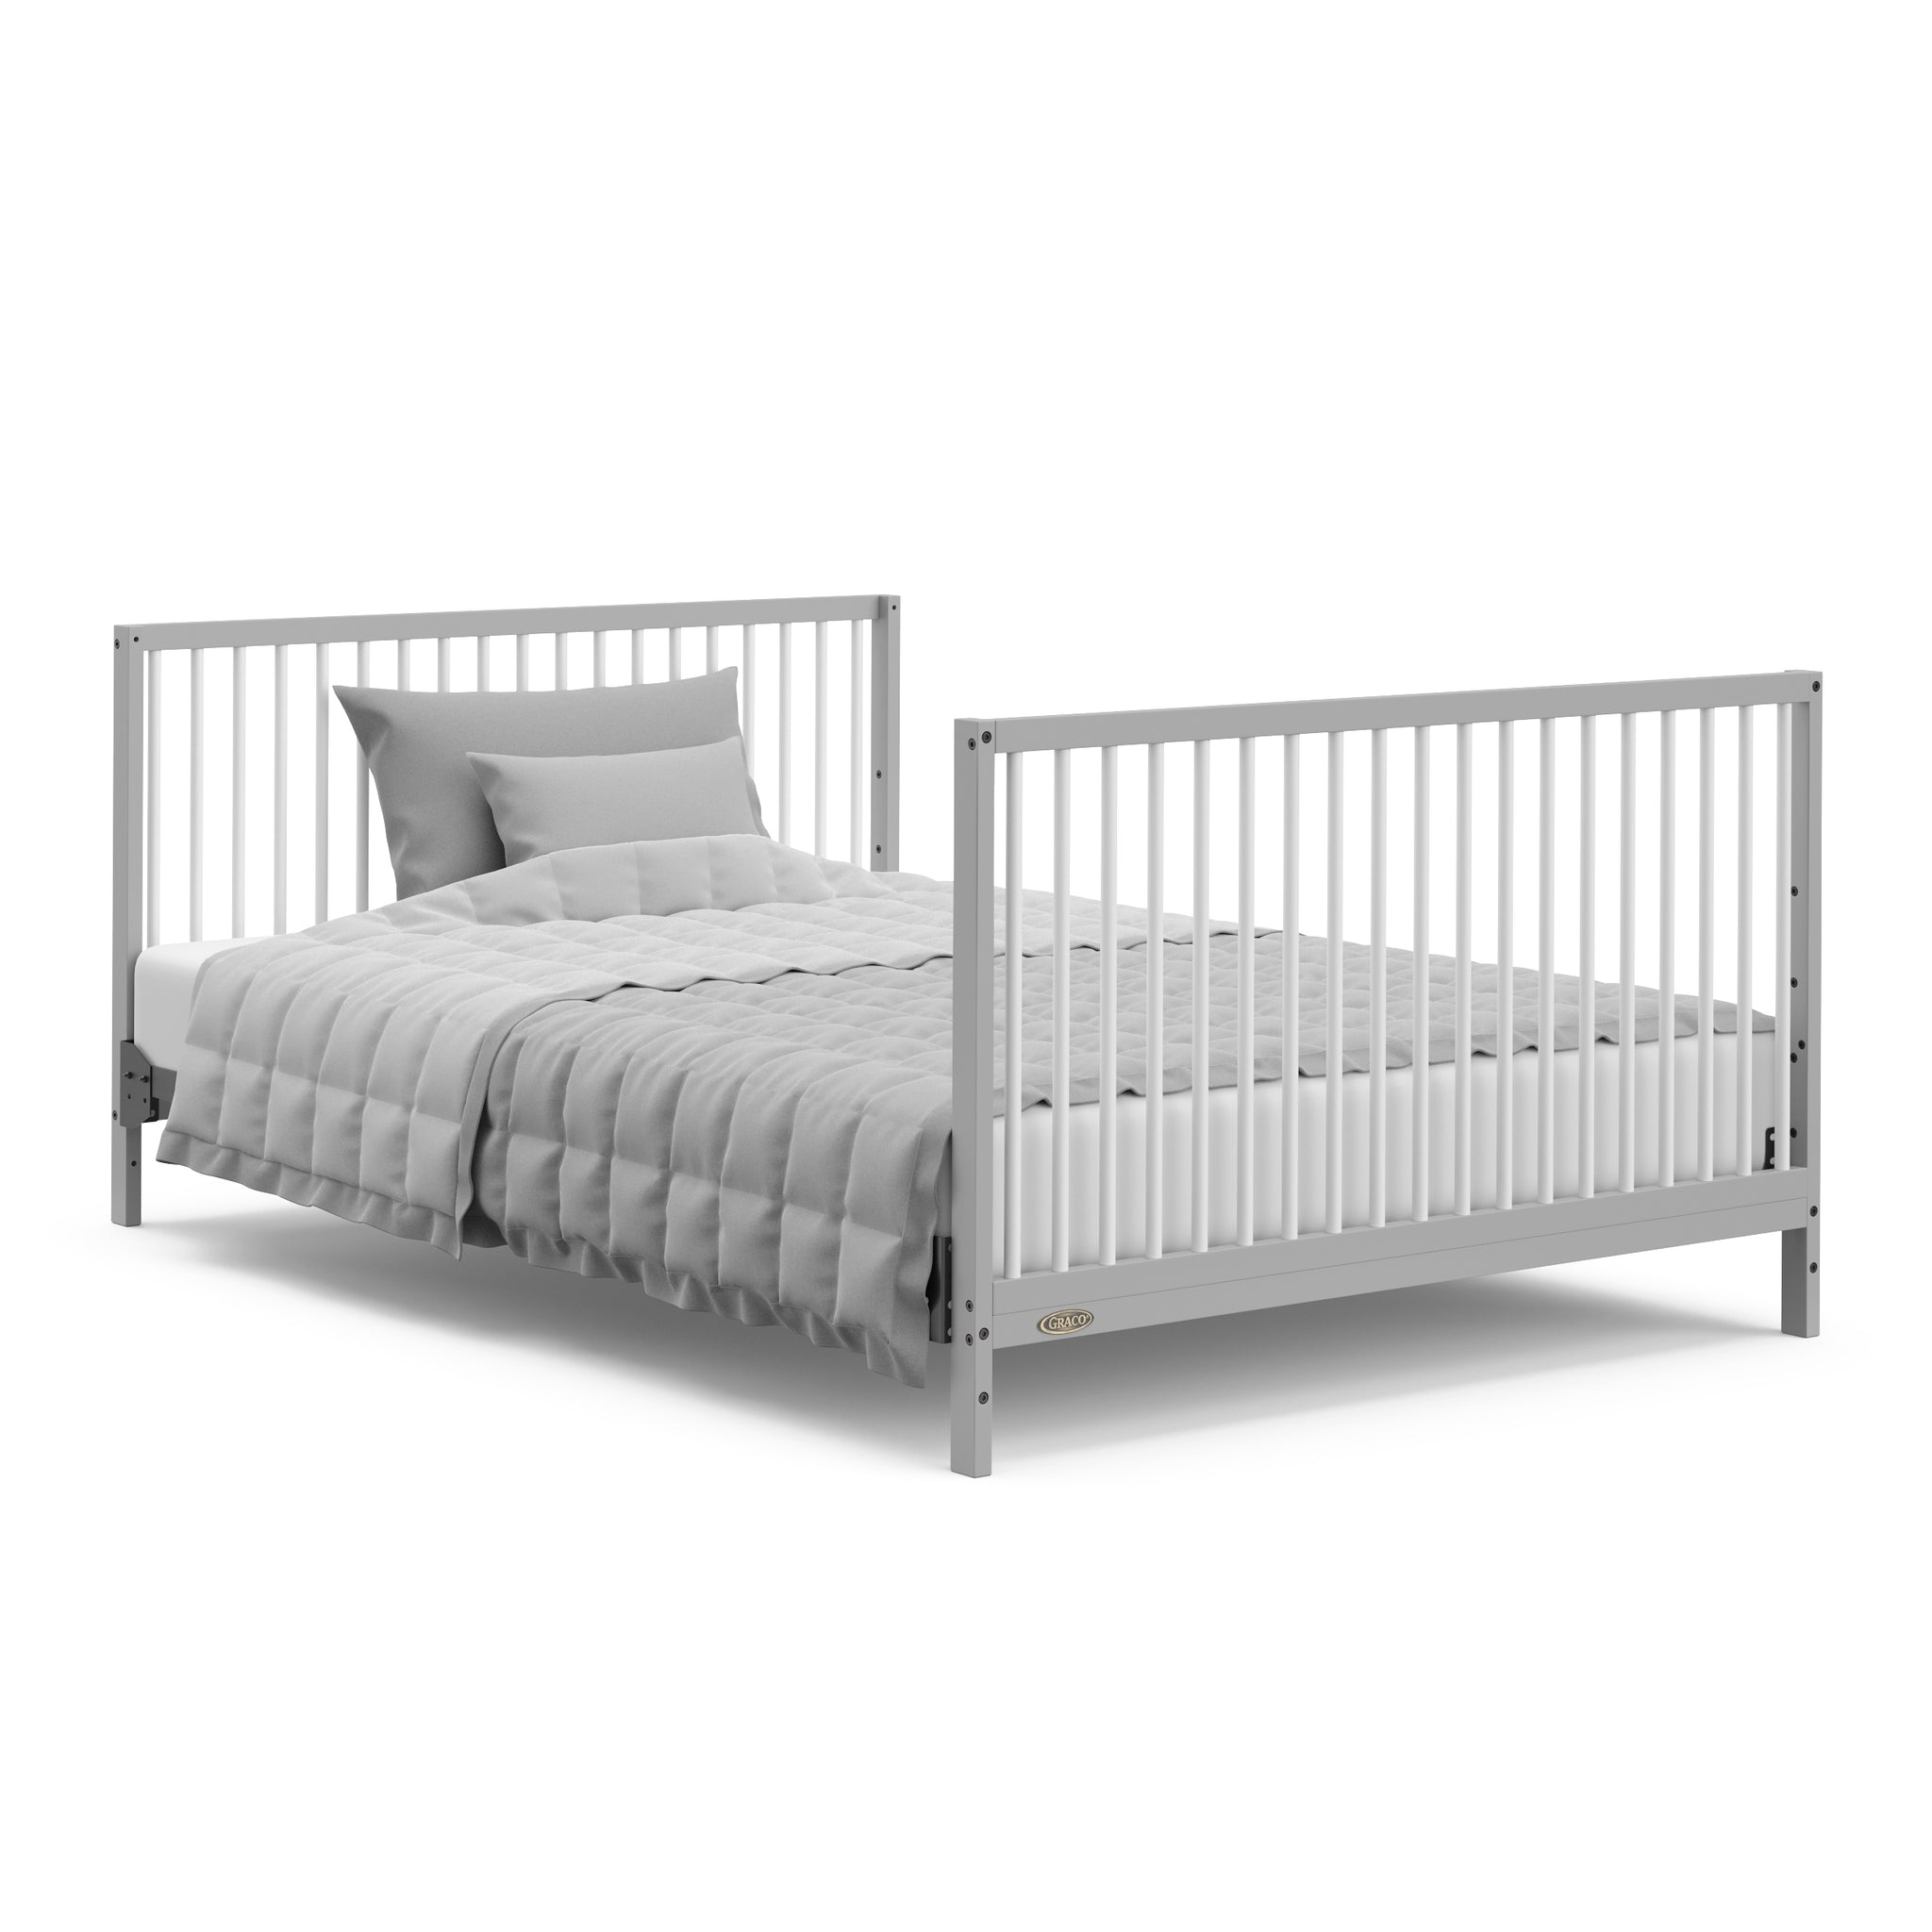 Pebble gray with white crib with drawer in full-size bed with headboard and footboard conversion